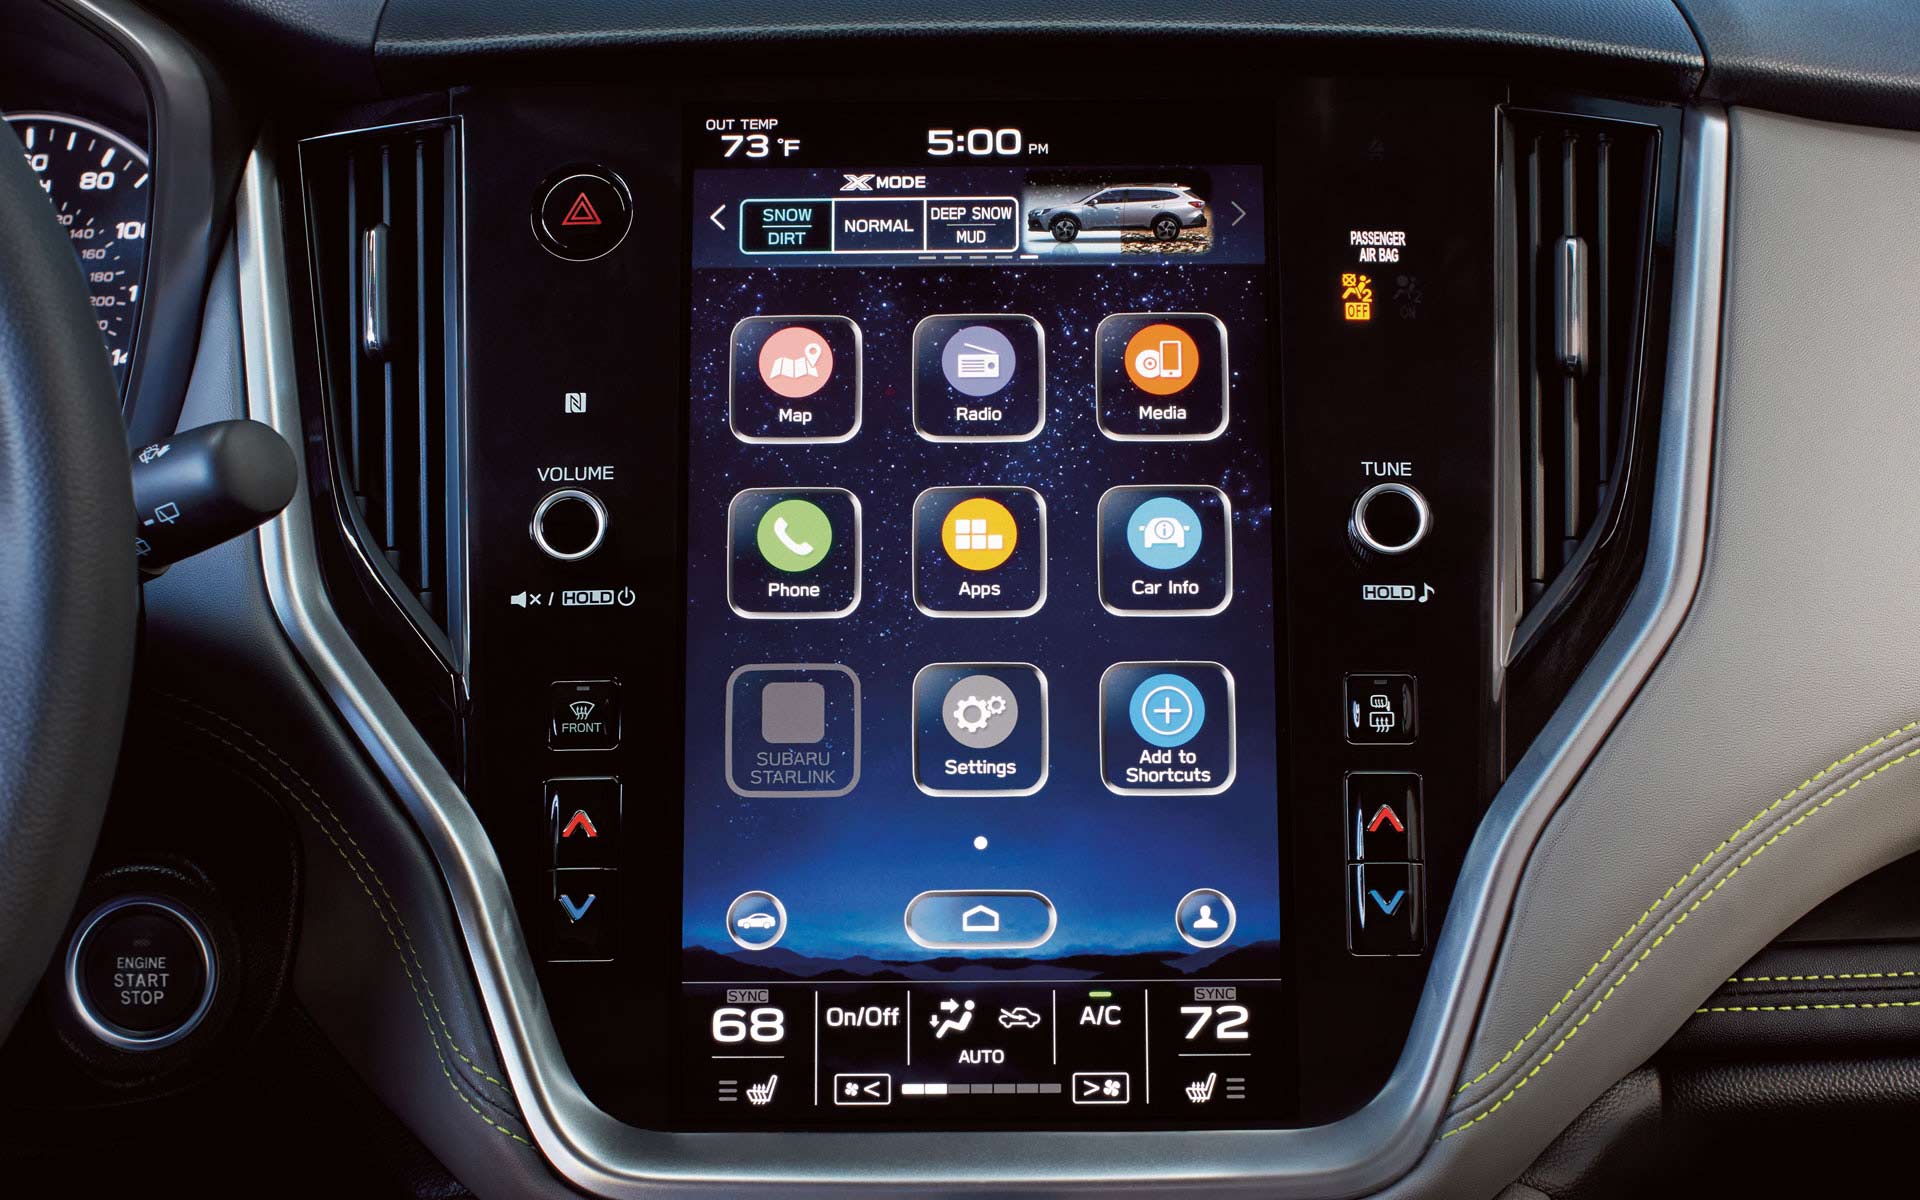 Subaru’s in-vehicle touchscreen navigation technology with STARLINK Multimedia.